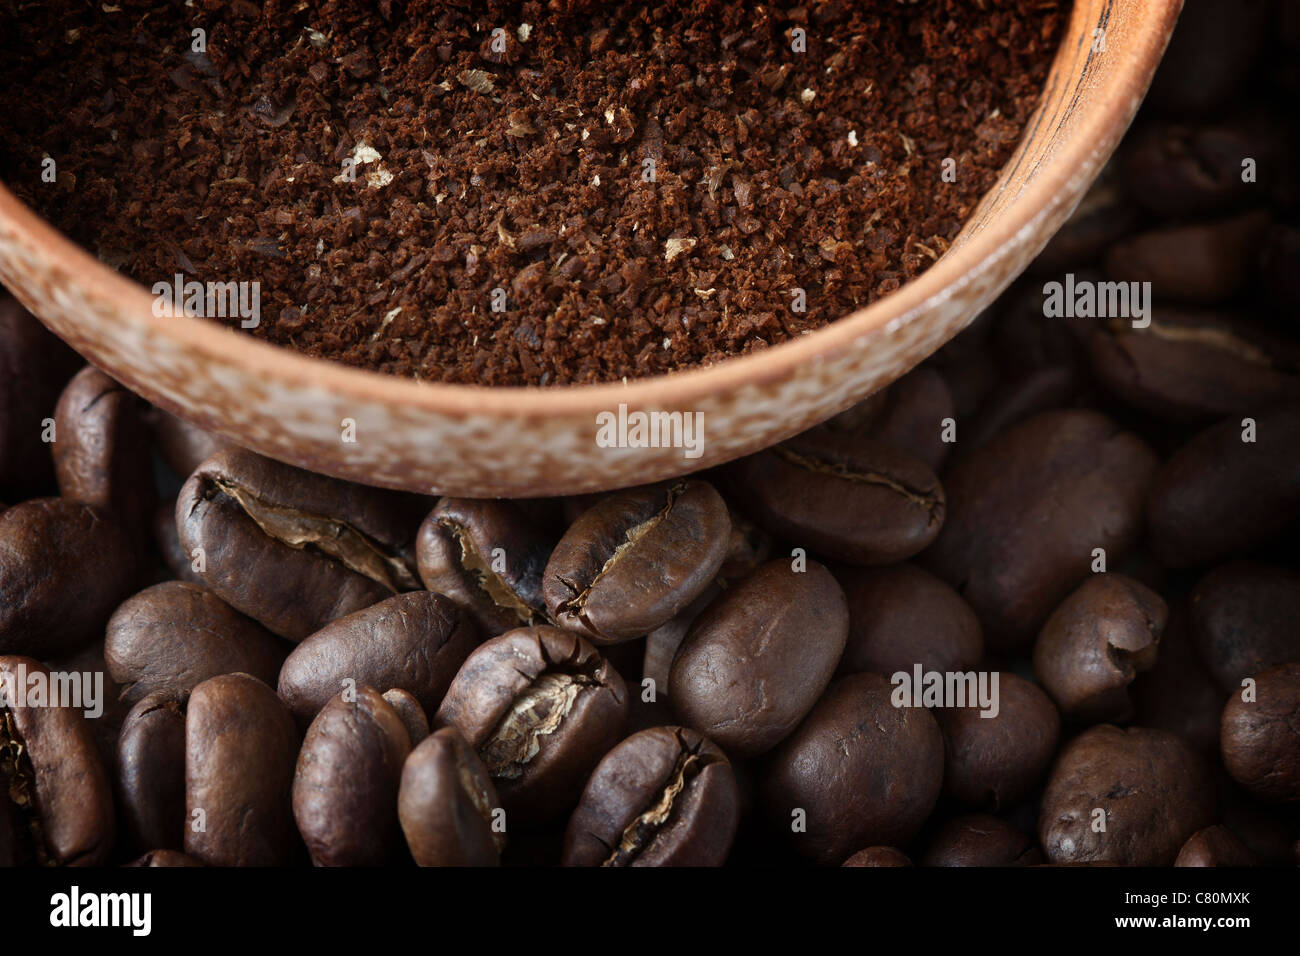 Full frame image of coffee beans and powdered coffee. Stock Photo